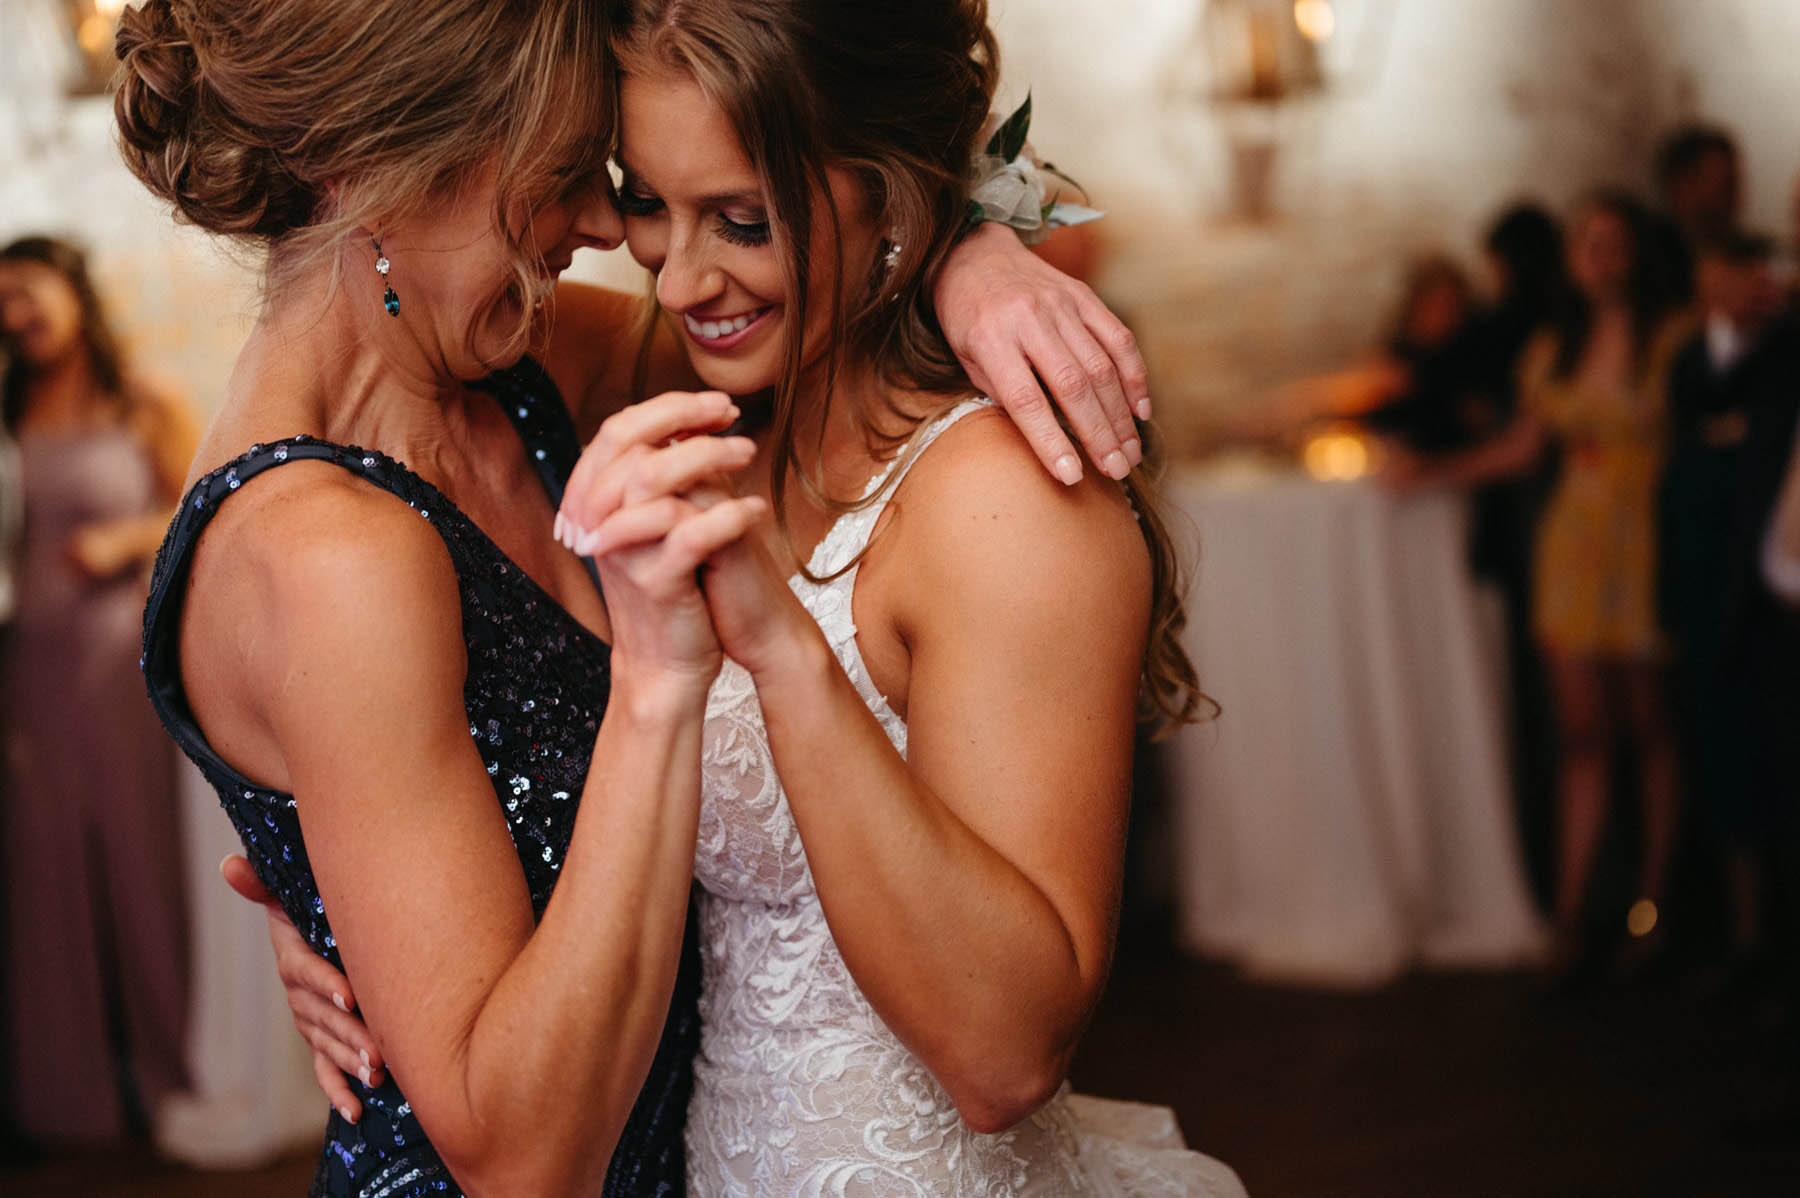 One of the brides dances with a woman wearing a sparkly blue dress.